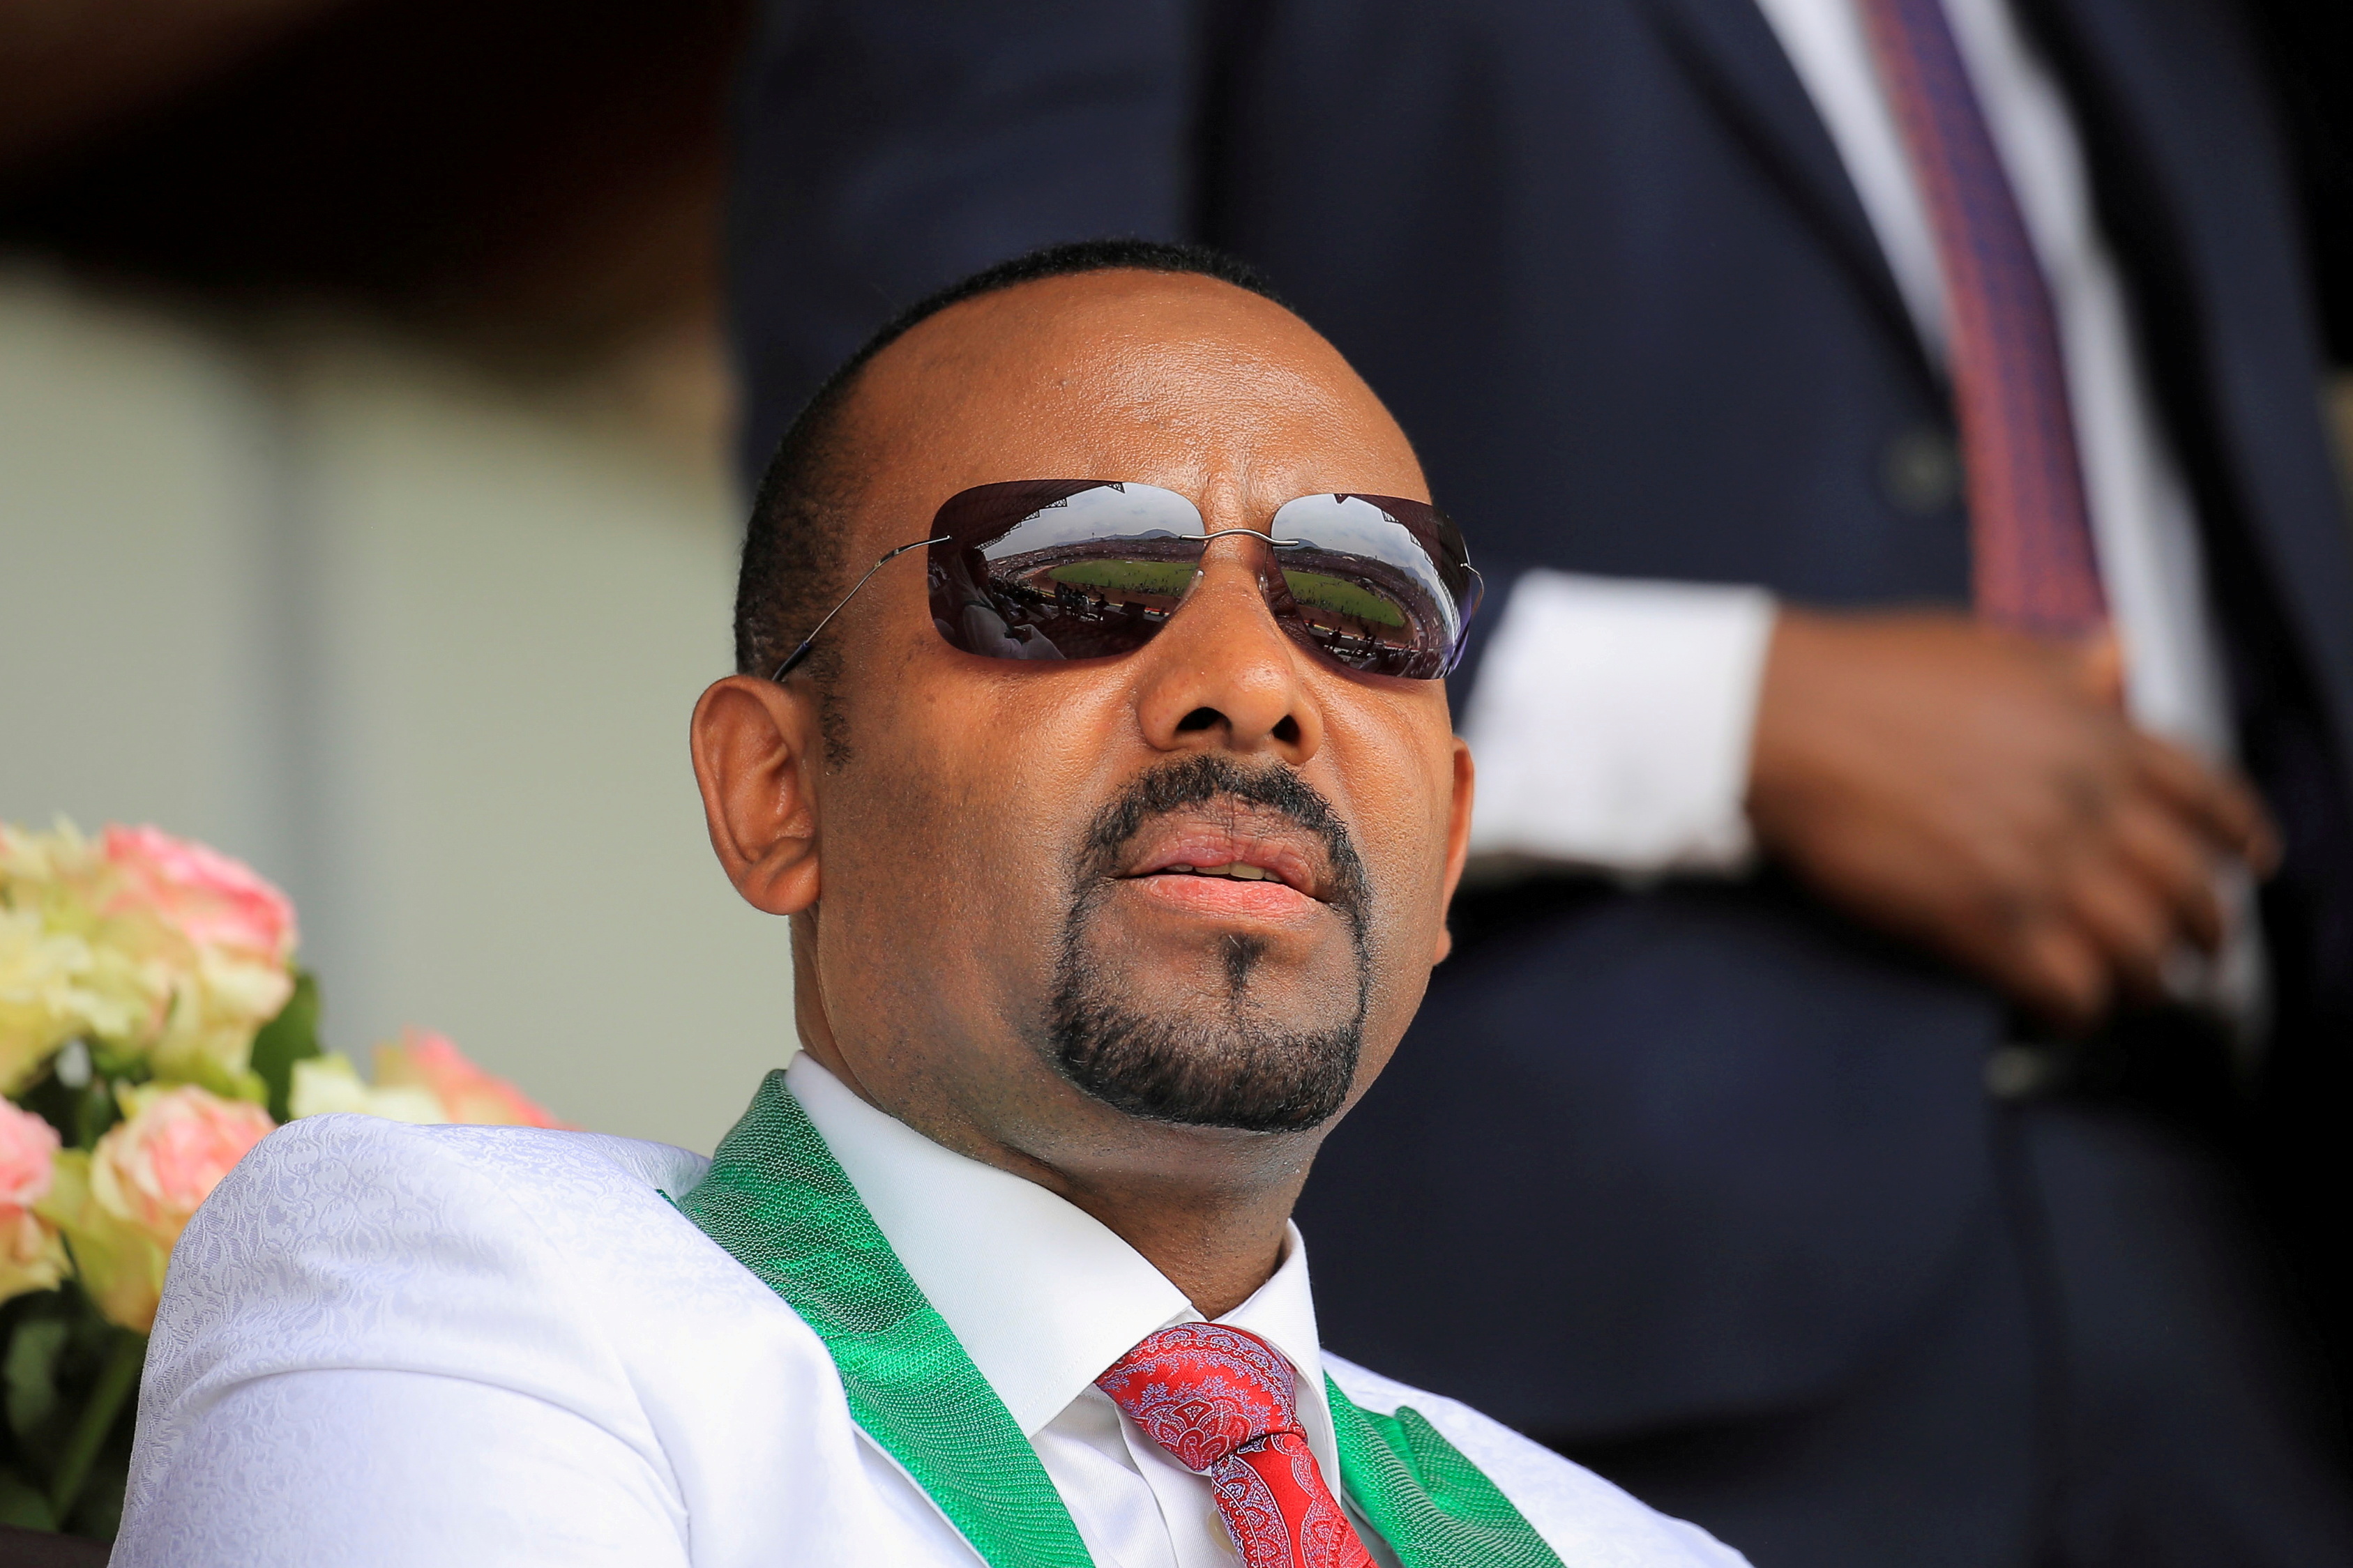         Ethiopian Prime Minister Abiy Ahmed attends his final campaign event ahead of Ethiopia's parliamentary and regional elections scheduled for June 21 in Jimma, Ethiopia, June 16, 2021. REUTERS / Tiksa Negeri / File Photo